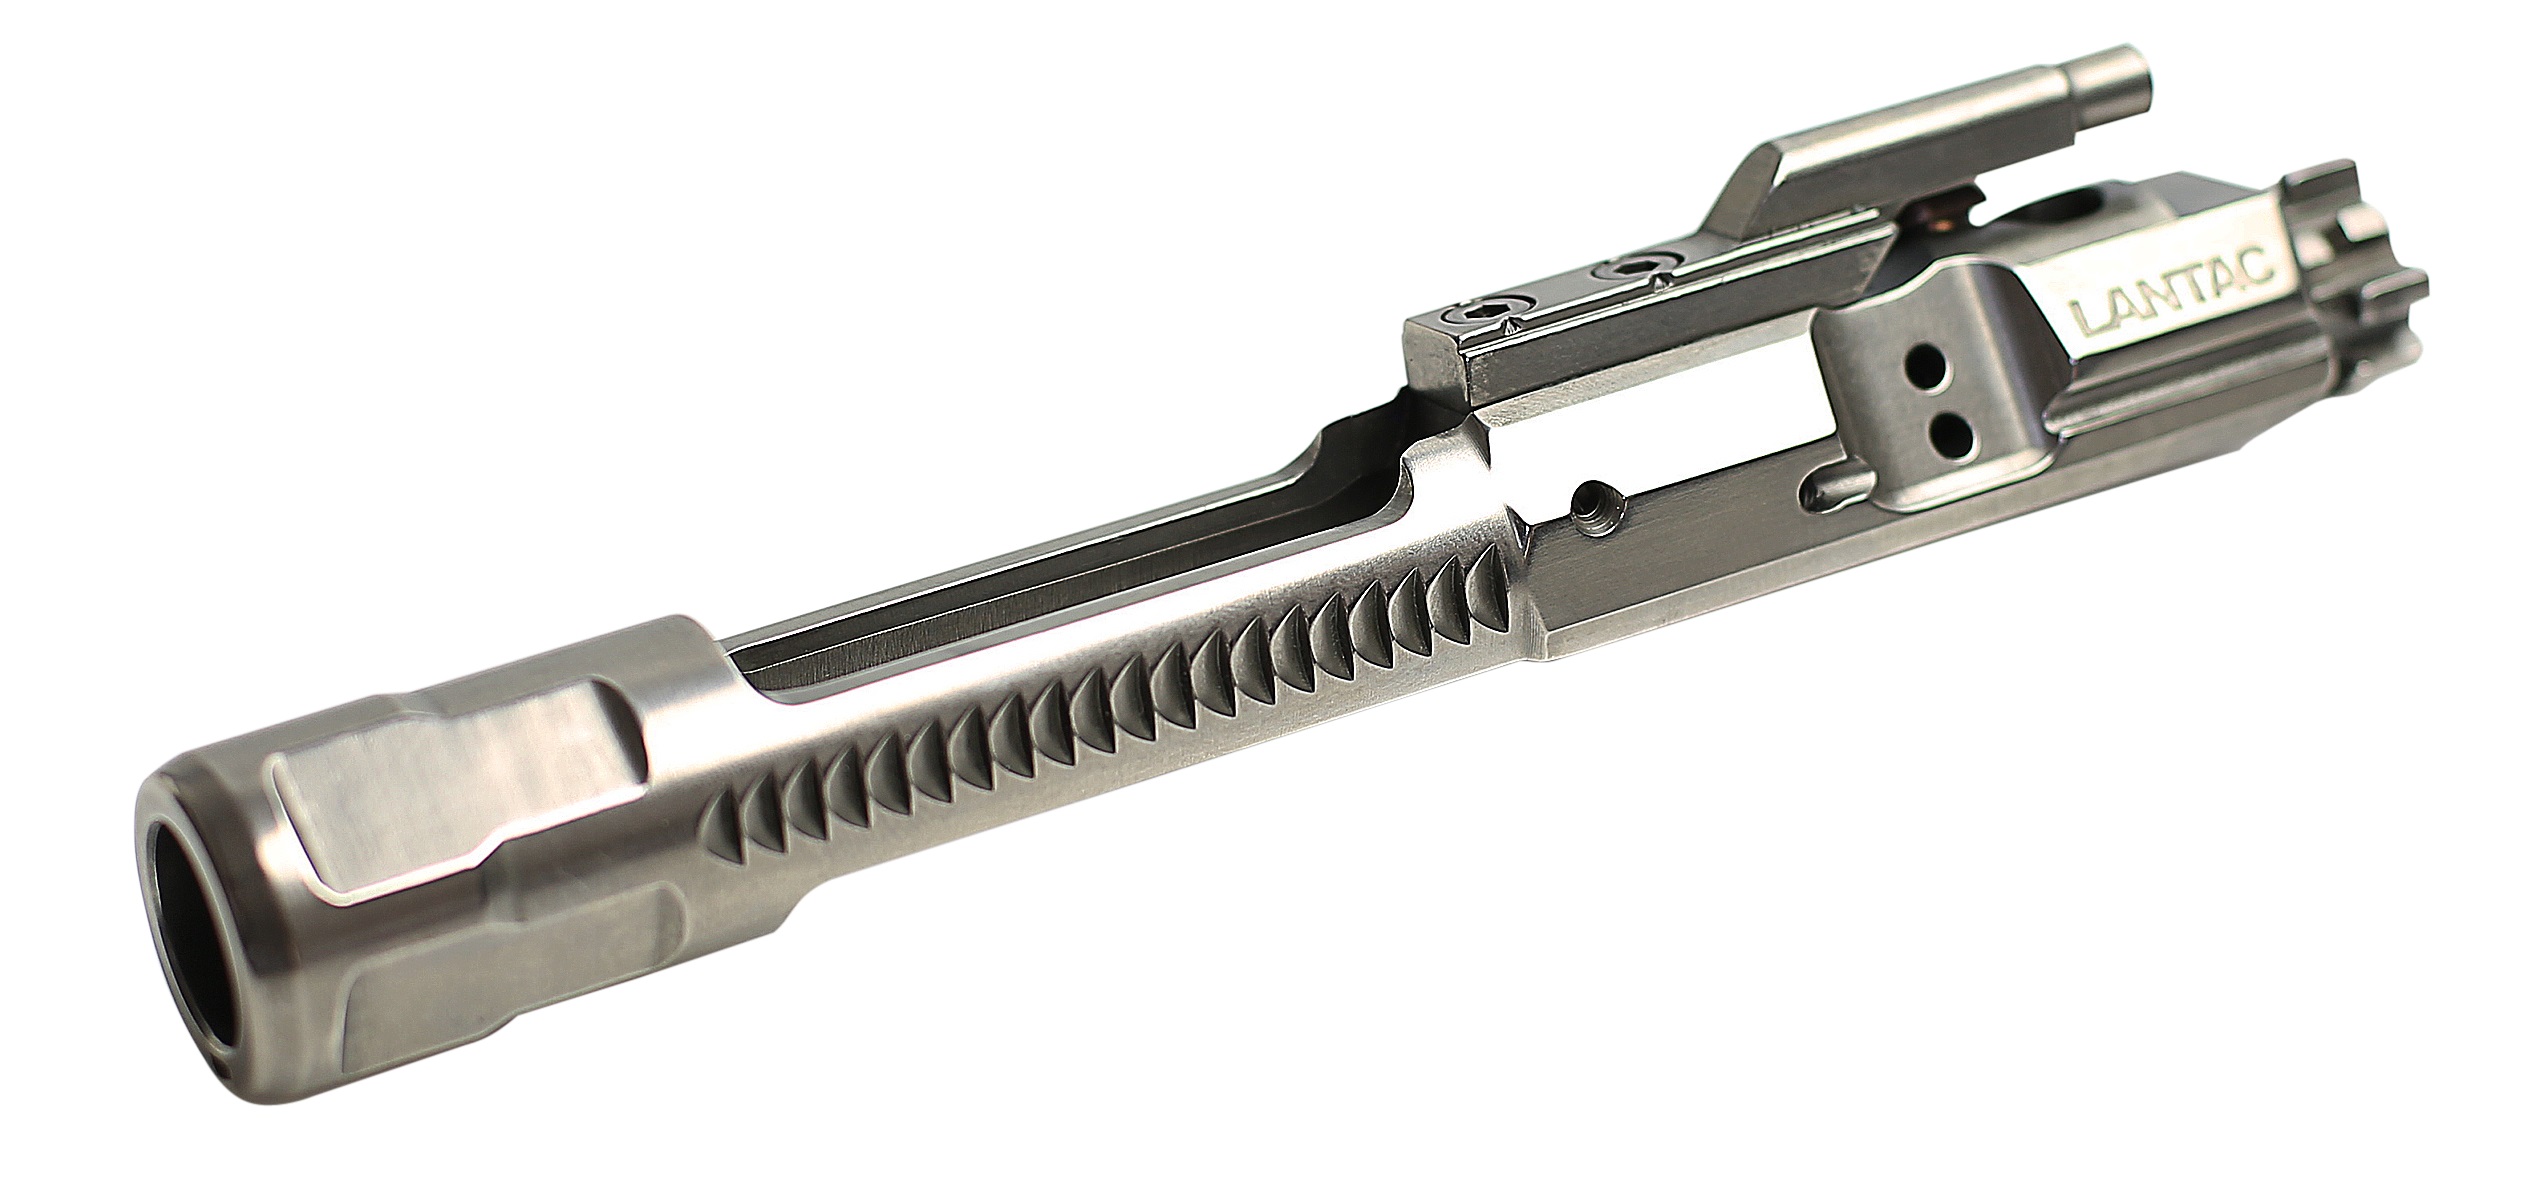 The Lantac Auto E-BCG is a great solution for your favorite auto rifle with...